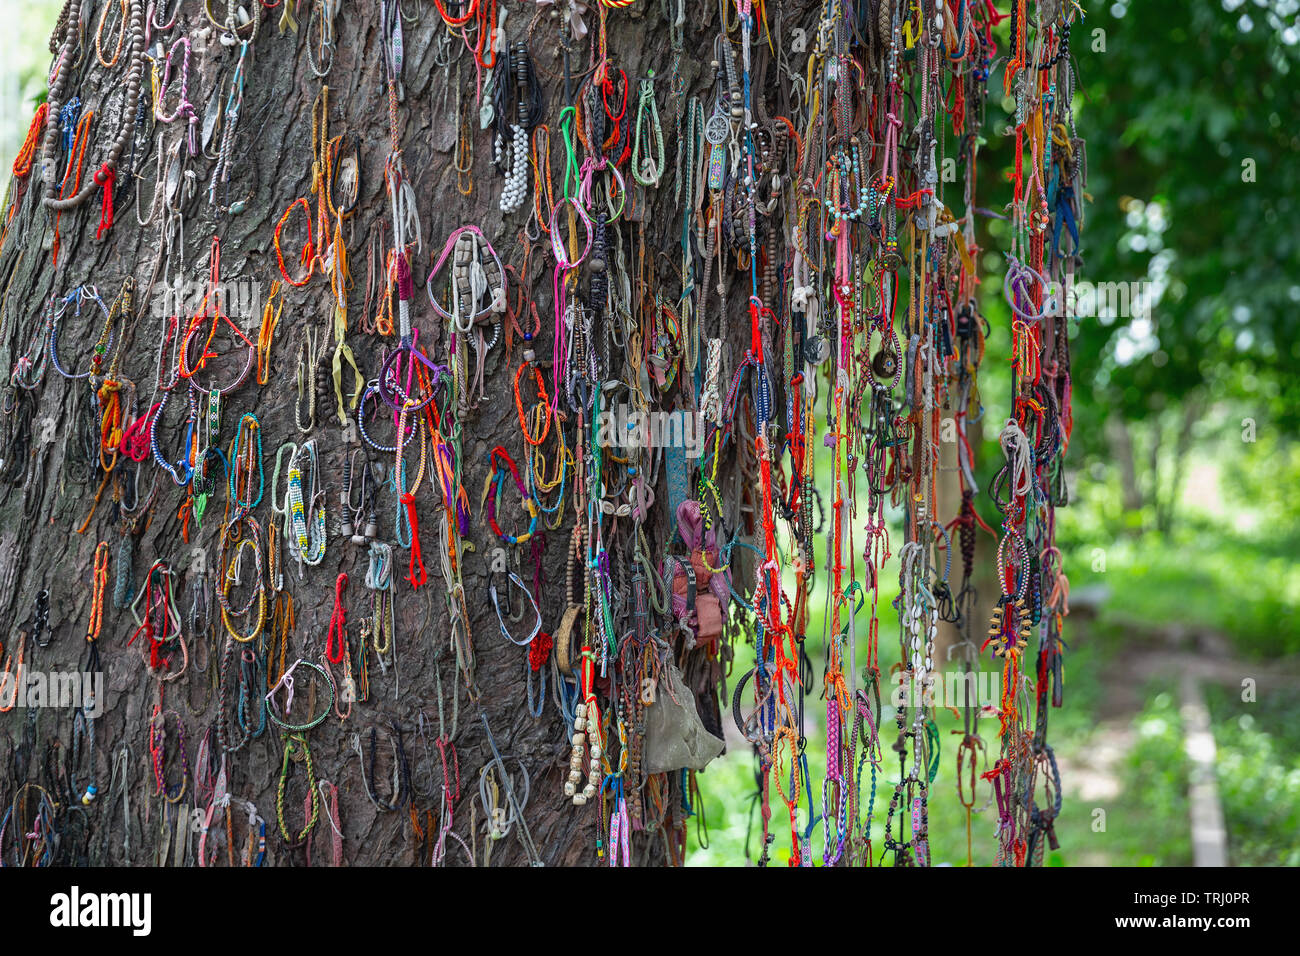 Bracelets hanging on the killing tree at Choeung Ek Genocide Memorial at the Killing Fields,  Phnom Penh, Cambodia, Asia Stock Photo